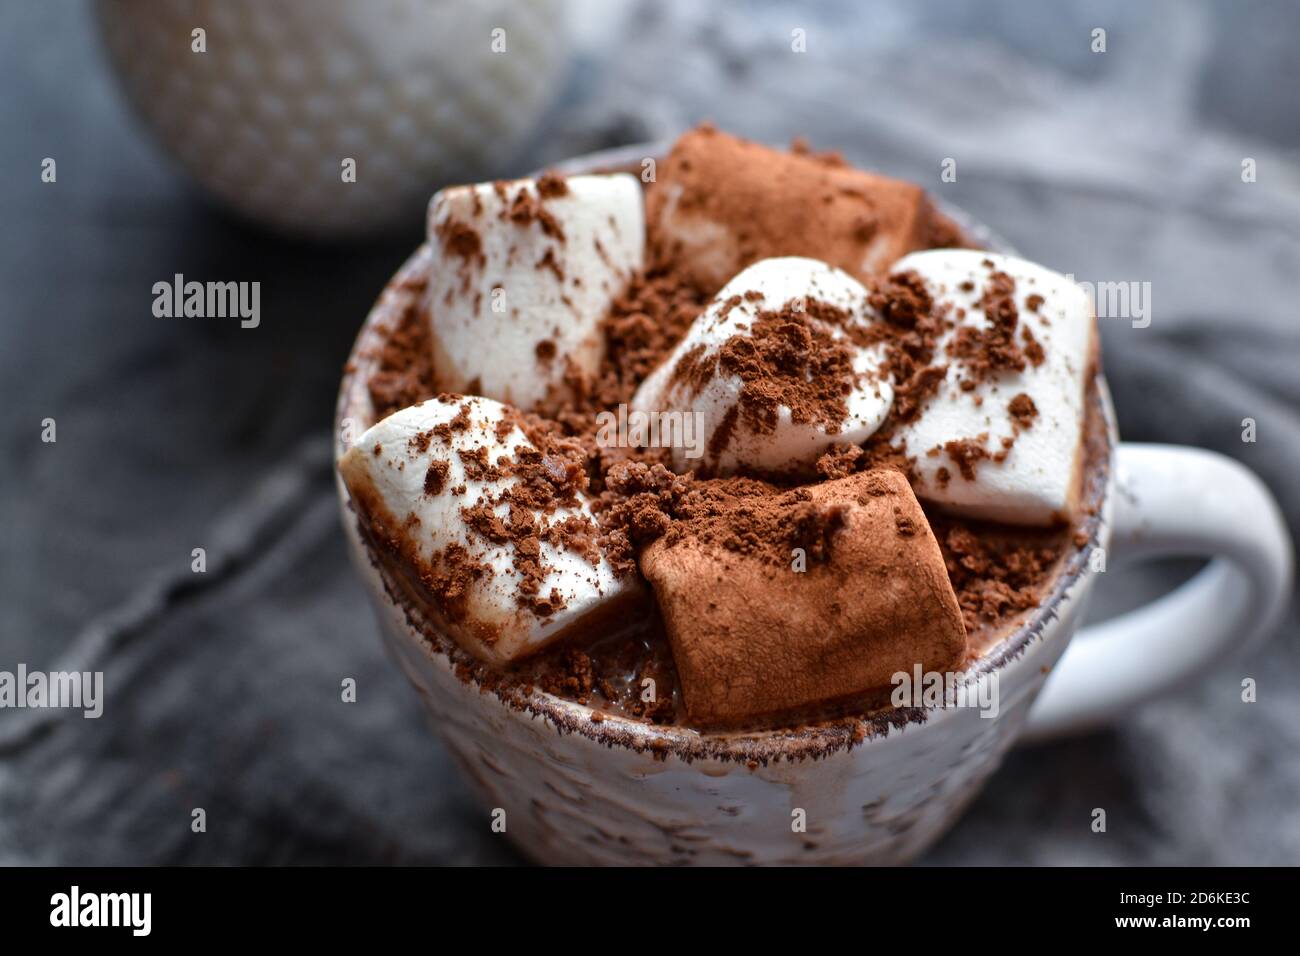 Hot chocolate and marshmallows. Hot Cocoa in a white cup. Dark background. Autumn drink concept. Copy space. Stock Photo